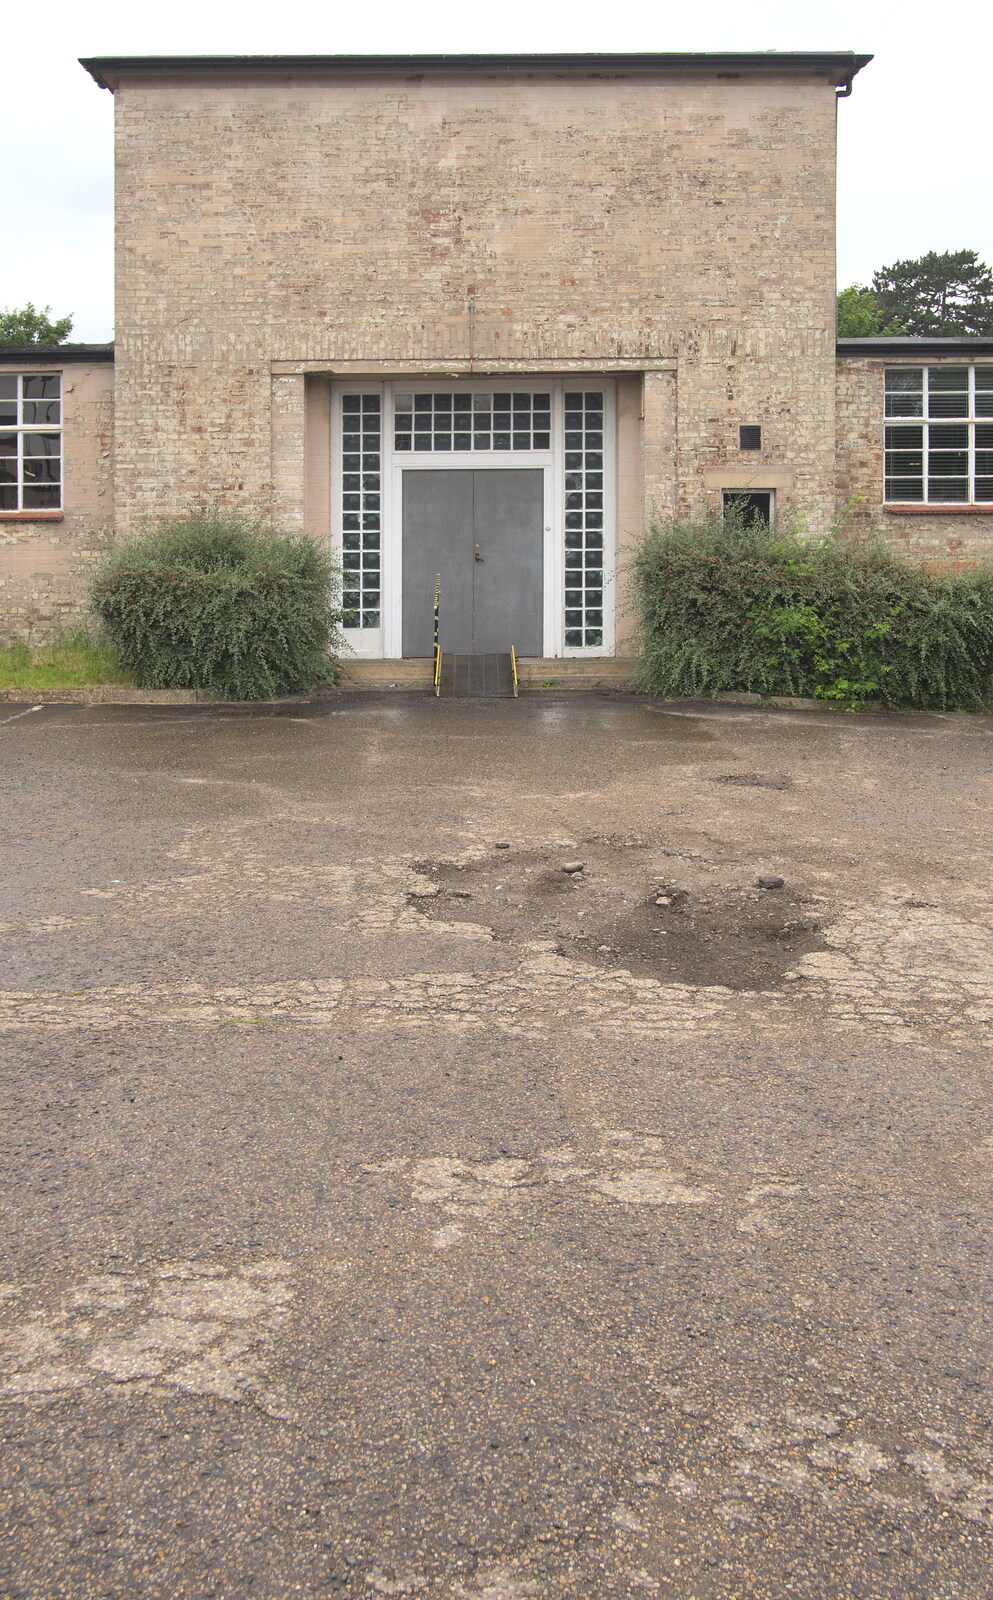 A 1940s building entrance from TouchType does Bletchley Park, Bletchley, Bedfordshire - 20th July 2012